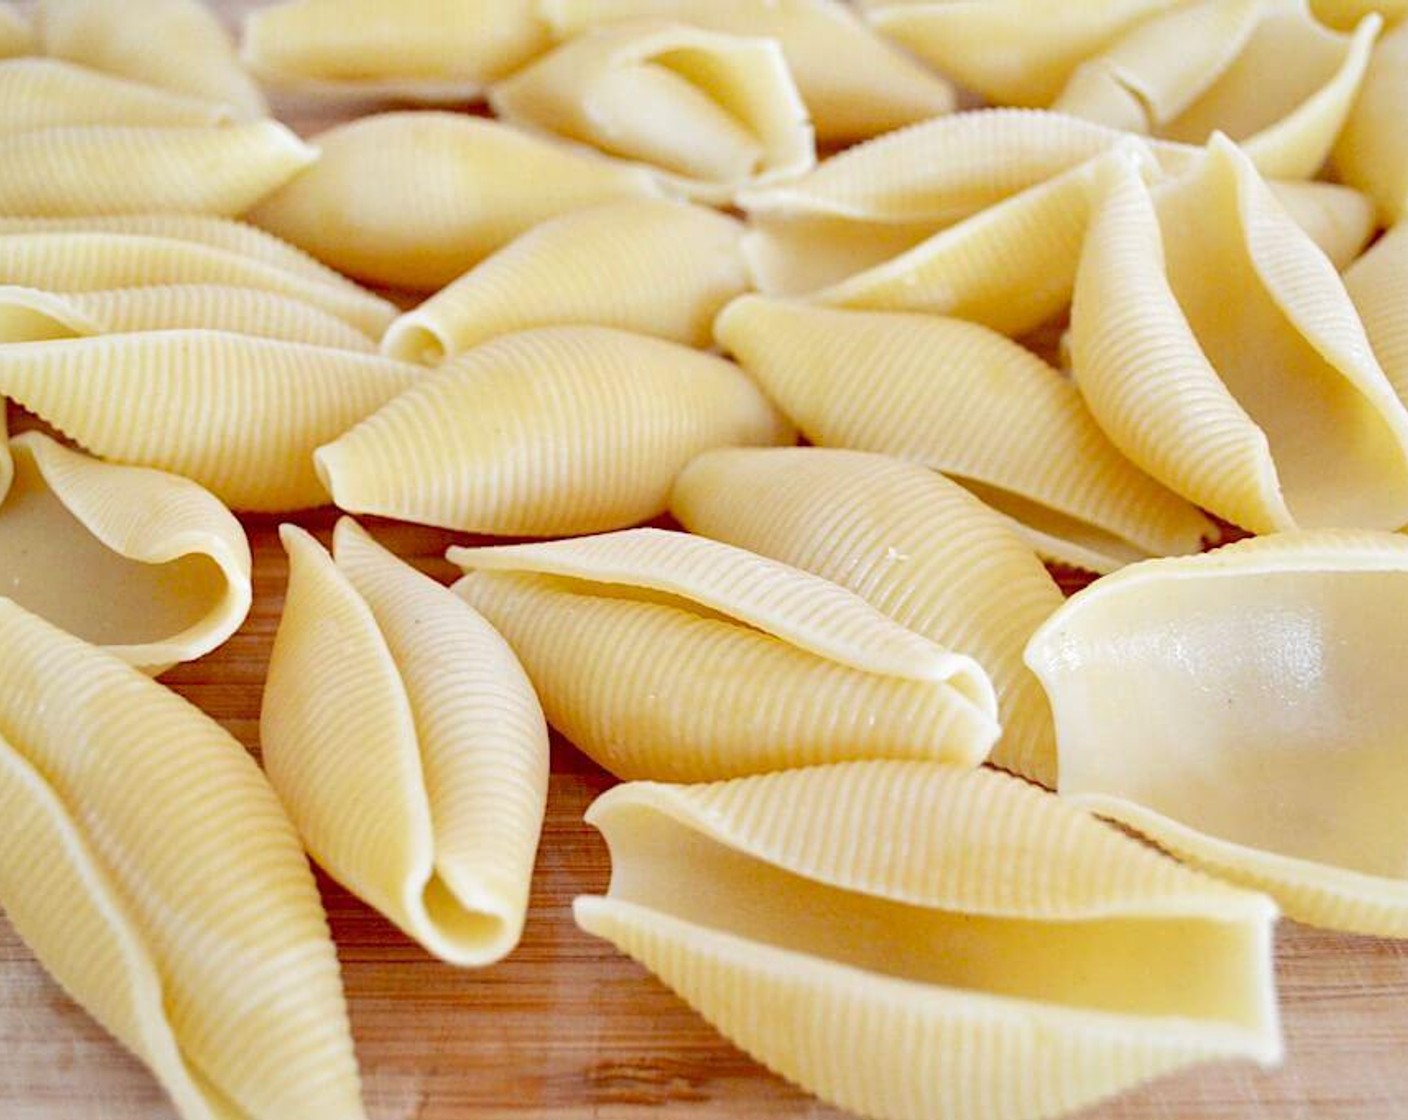 step 6 Meanwhile, bring a large pot of water to a boil and cook the Jumbo Pasta Shells (25) in it until tender, about 7-8 minute. Drain them and lay them out on a clean surface to let them cool enough to handle.